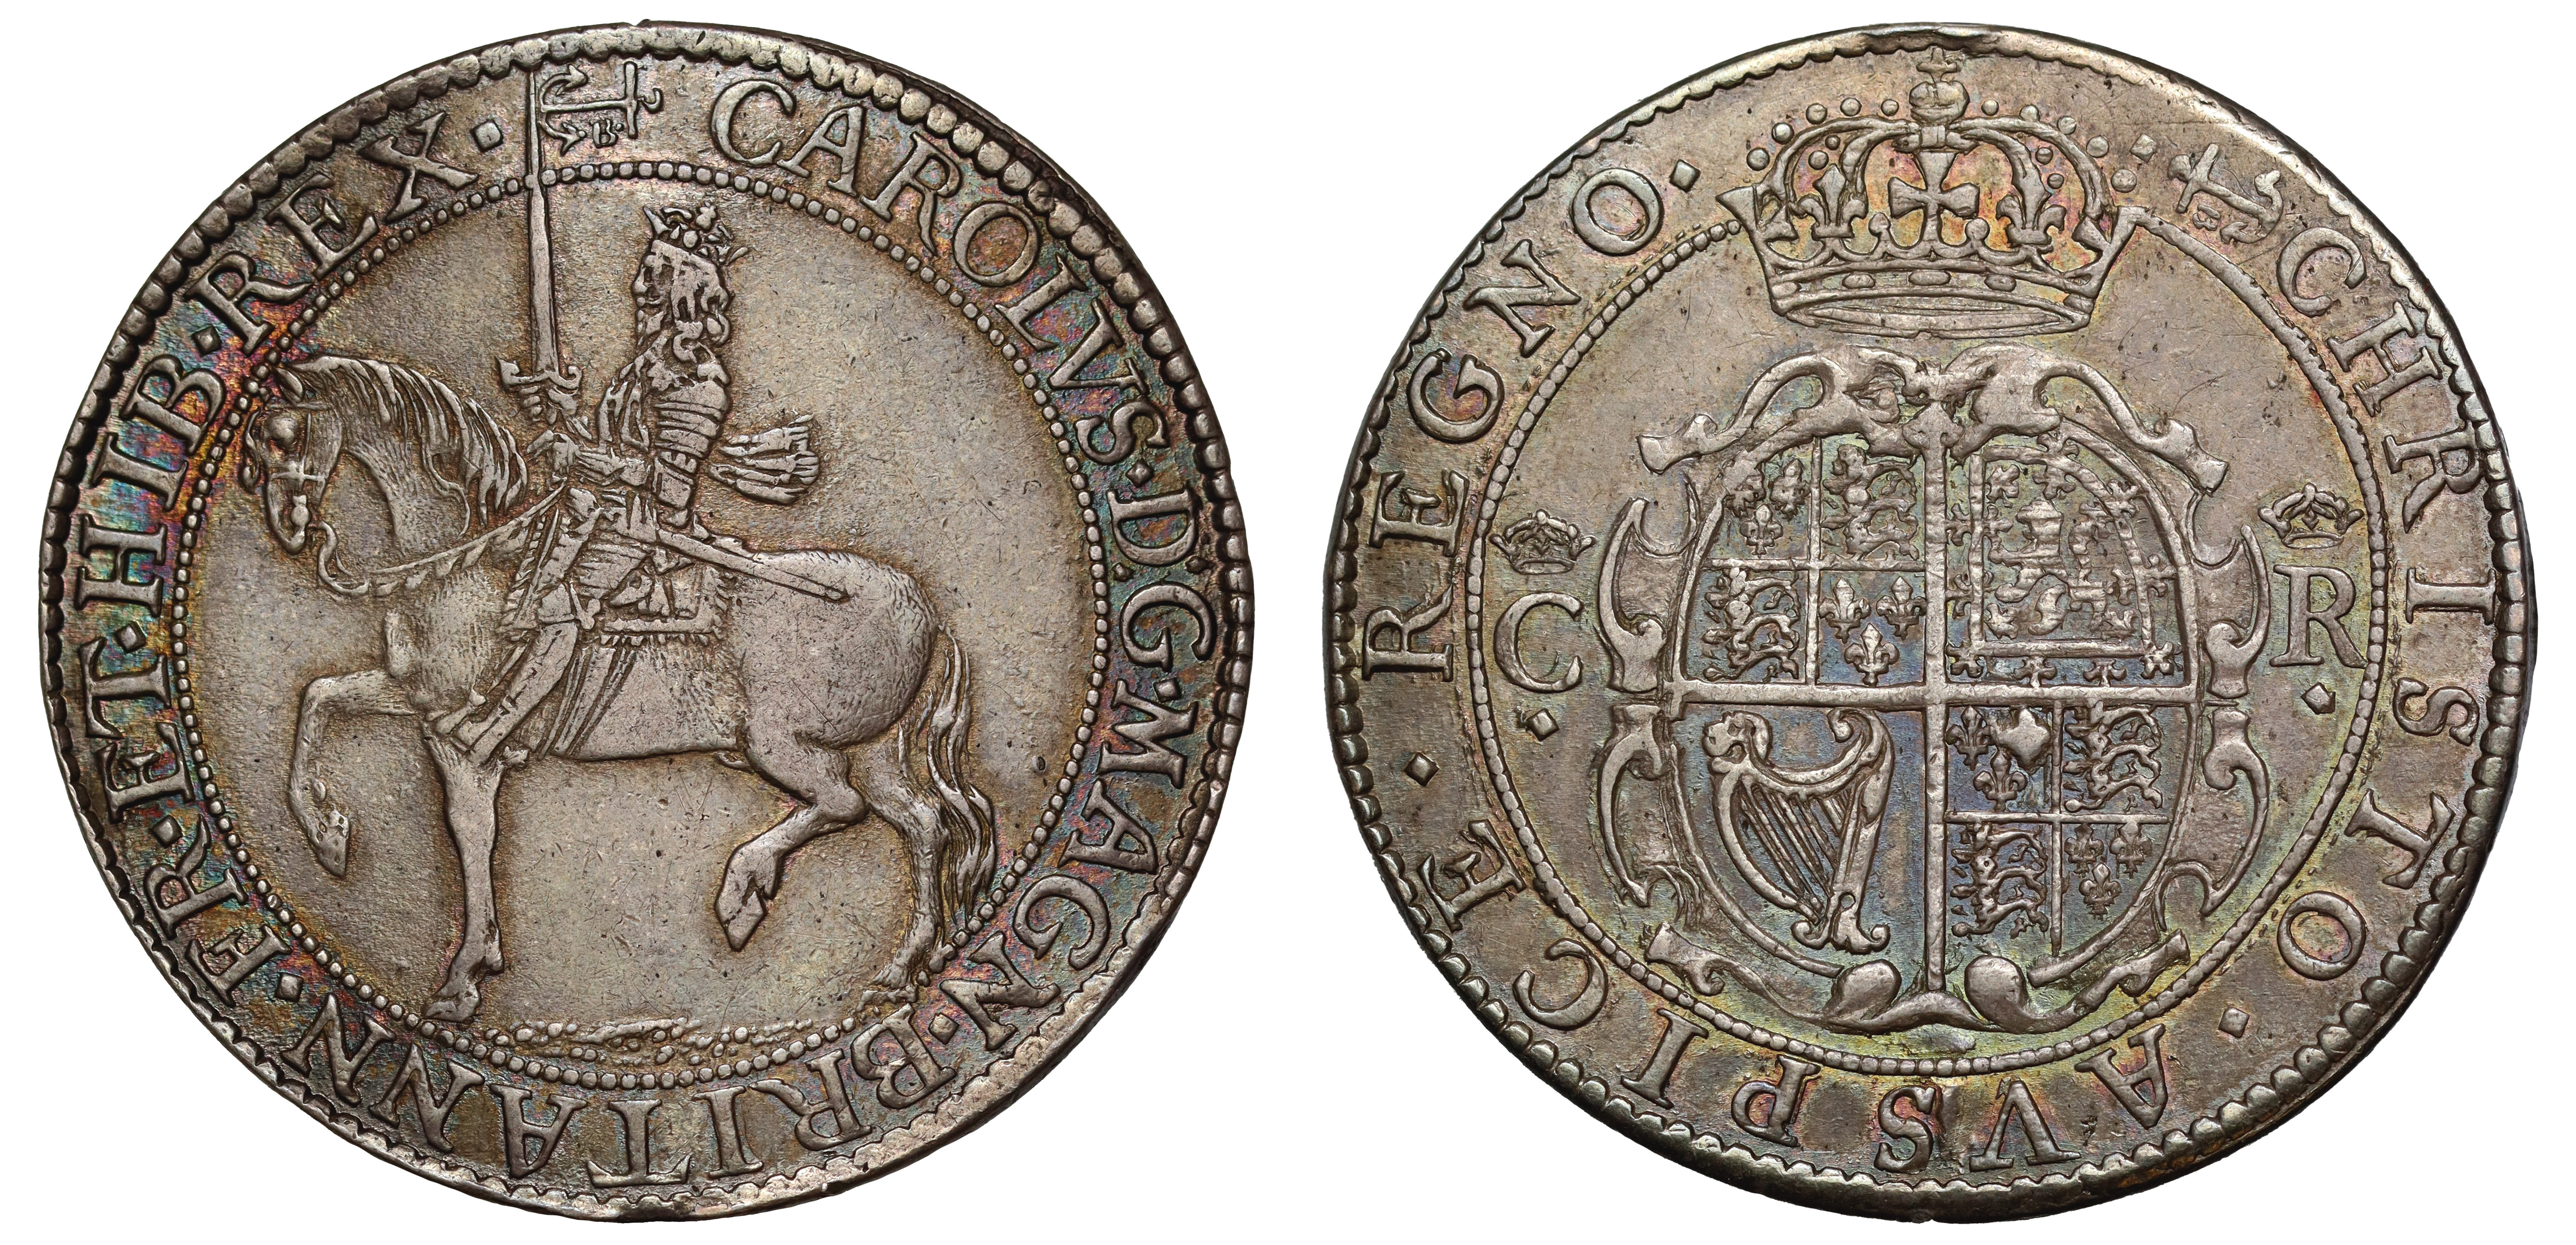 Charles I (1625-49), silver Halfcrown of Two Shillings and Sixpence, Nicholas Briot's second